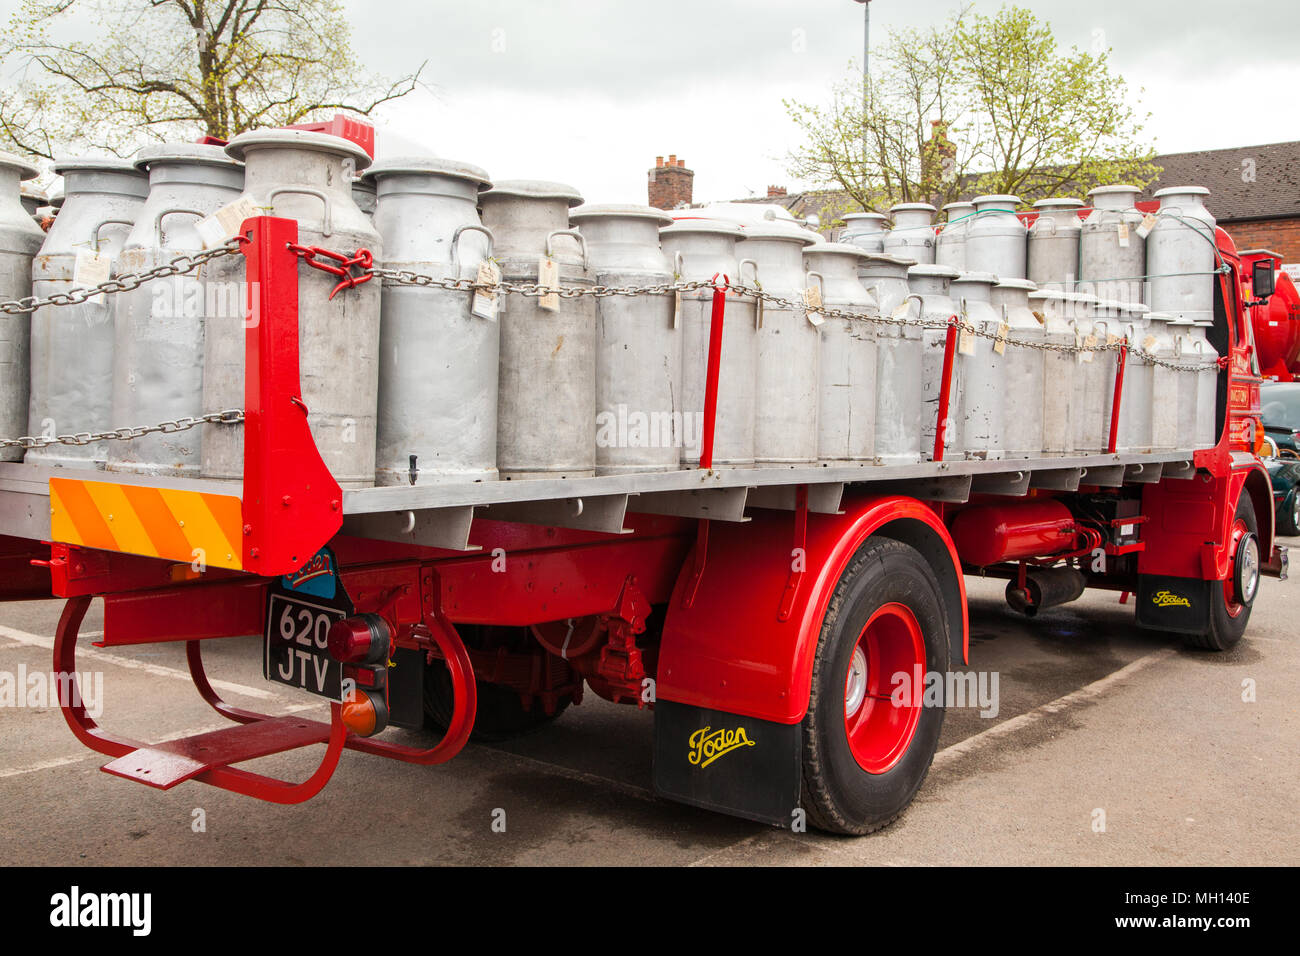 Classic Foden flatbed  wagon made in Sandbach Cheshire, used to collect milk churns from rural country farms, seen here at the Sandbach transport show Stock Photo